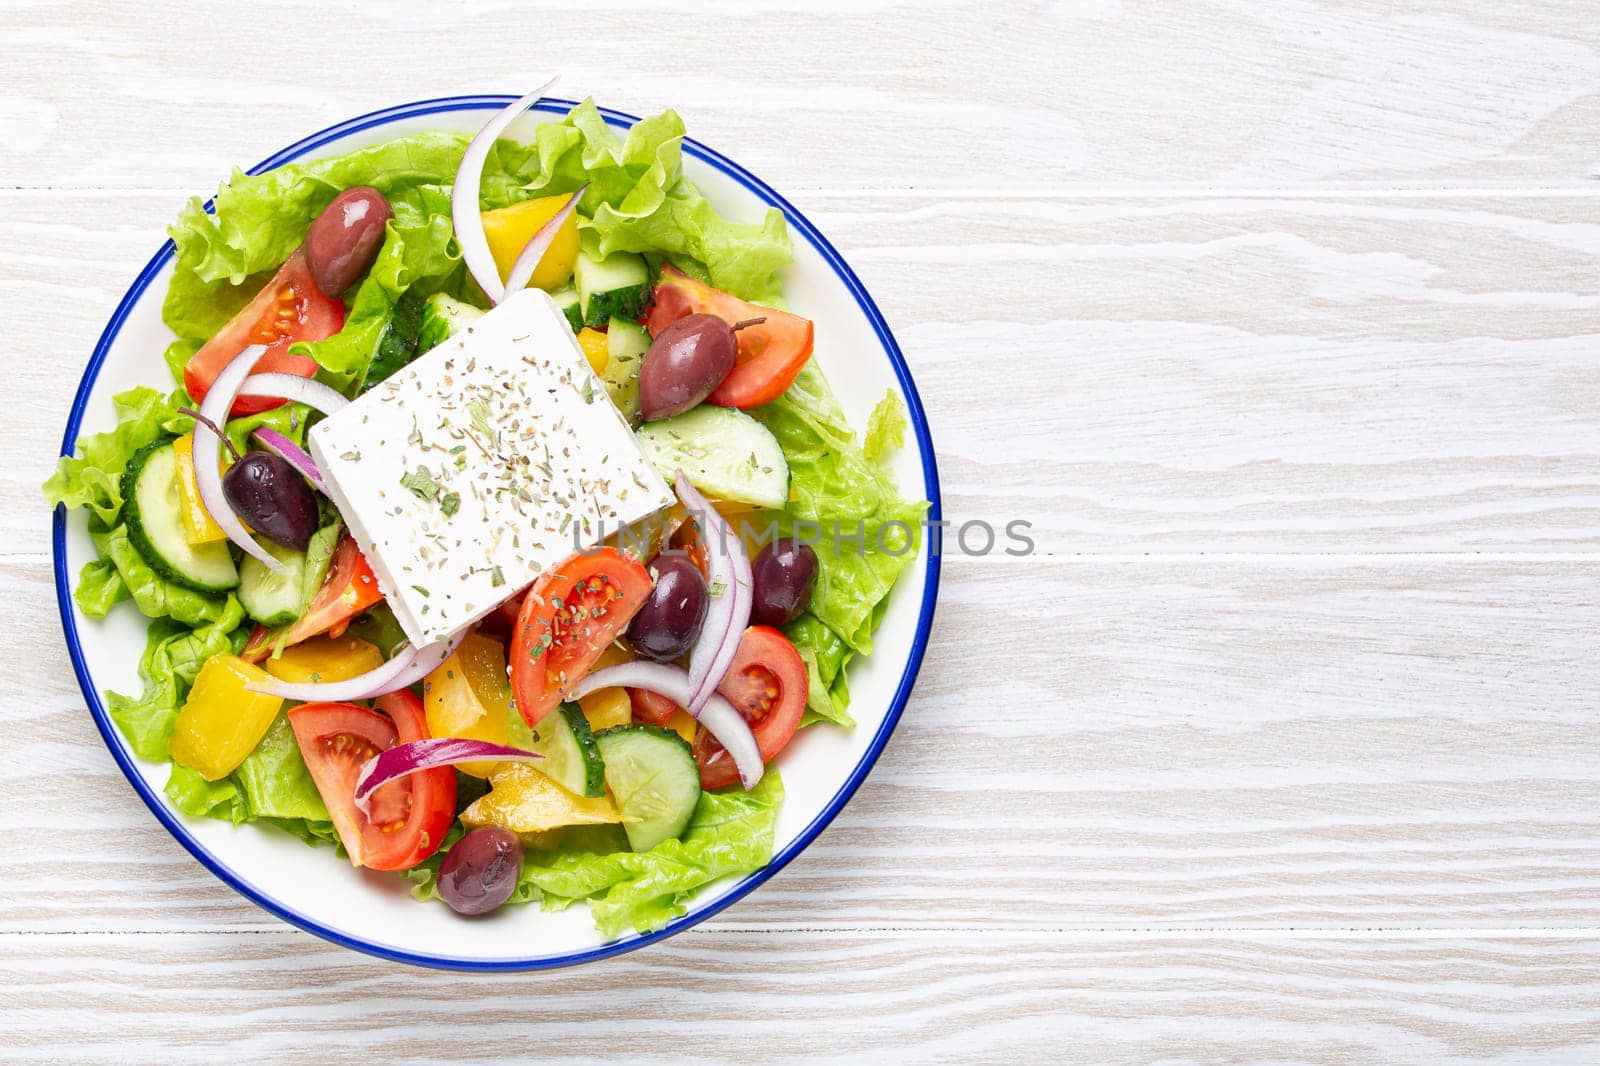 Traditional Greek Salad with Feta Cheese, Tomatoes, Bell Pepper, Cucumbers, Olives, Herbs in white ceramic bowl on White rustic wooden table background from above, Cuisine of Greece. Copy space